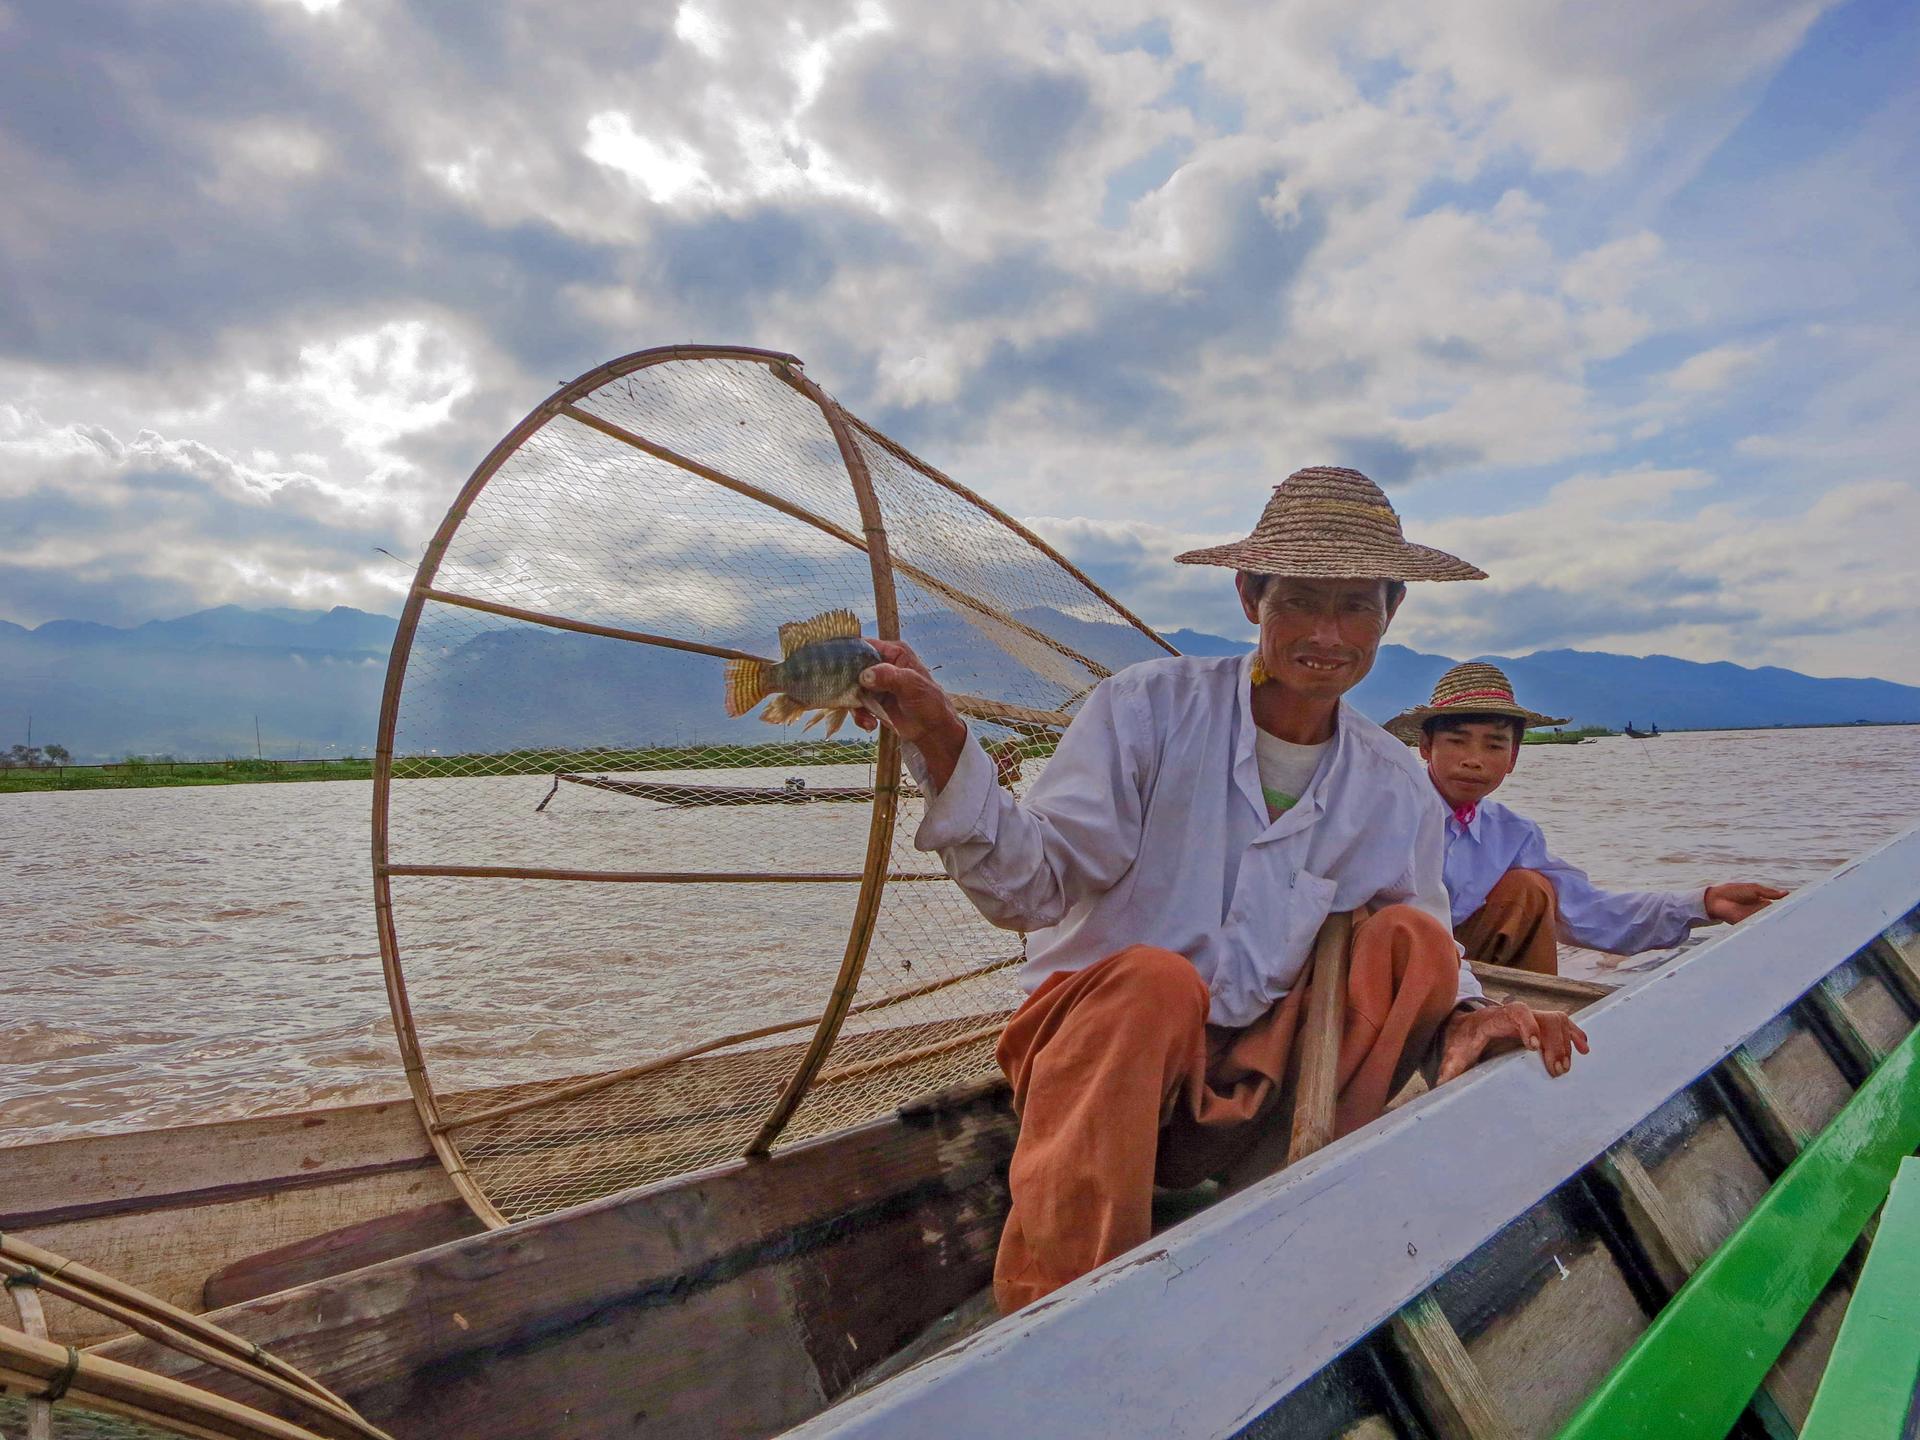 A fisherman holds up the already-dead fish that he used in his performance for tourists. With pollution and other human impacts harming Inle's aquatic ecosystem, the man now makes much more money performing his fishing routine than actually fishing.